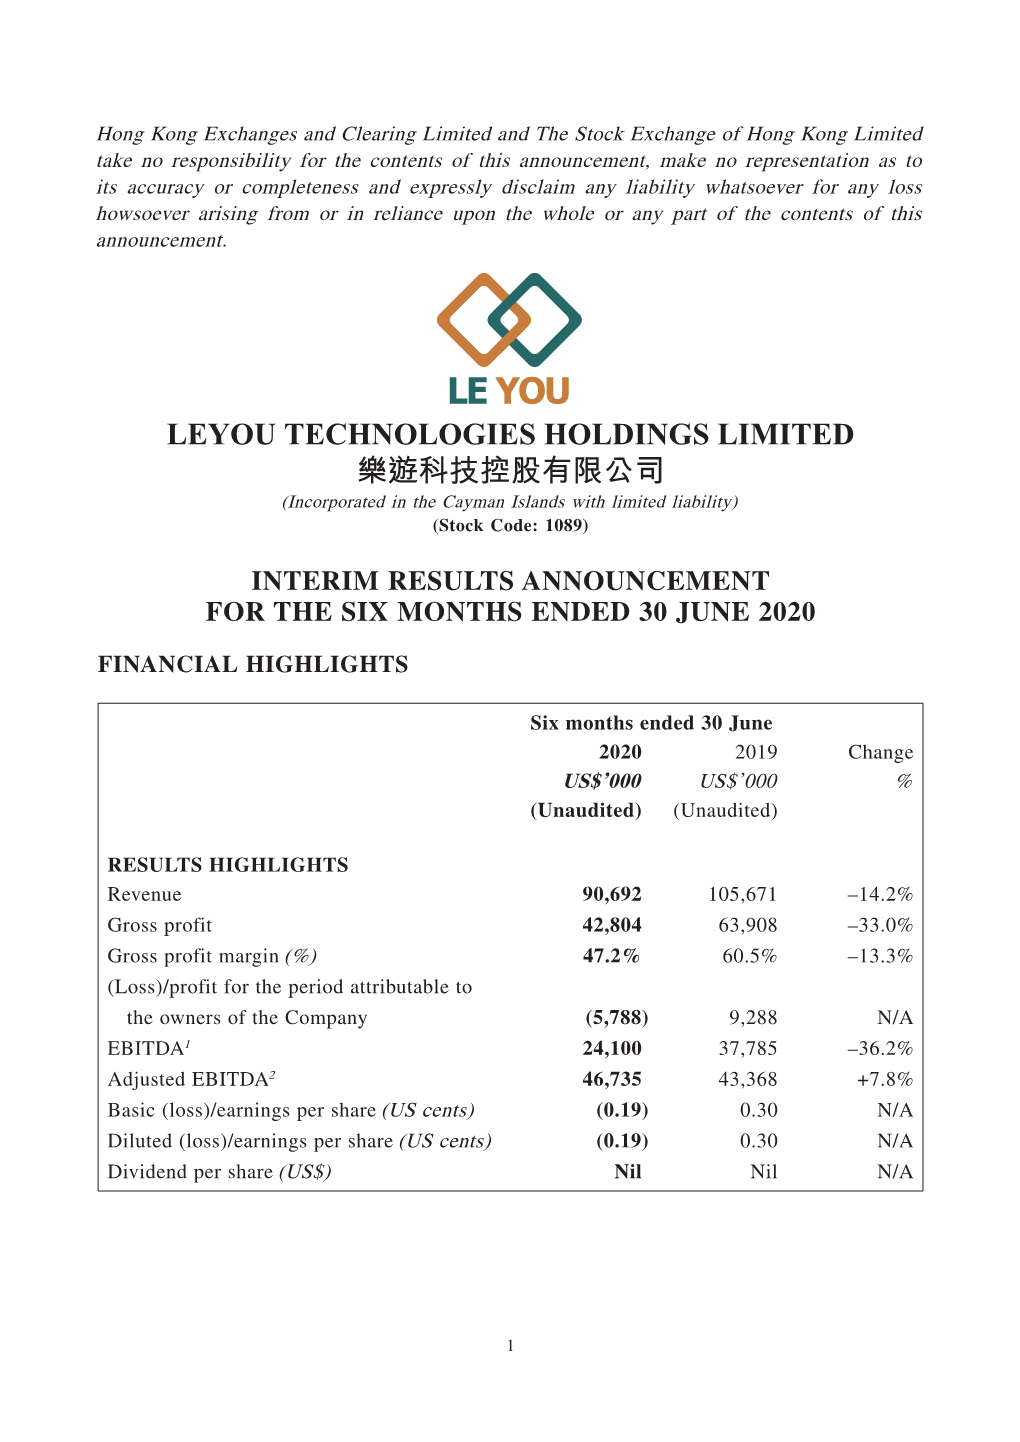 LEYOU TECHNOLOGIES HOLDINGS LIMITED 樂遊科技控股有限公司 (Incorporated in the Cayman Islands with Limited Liability) (Stock Code: 1089)